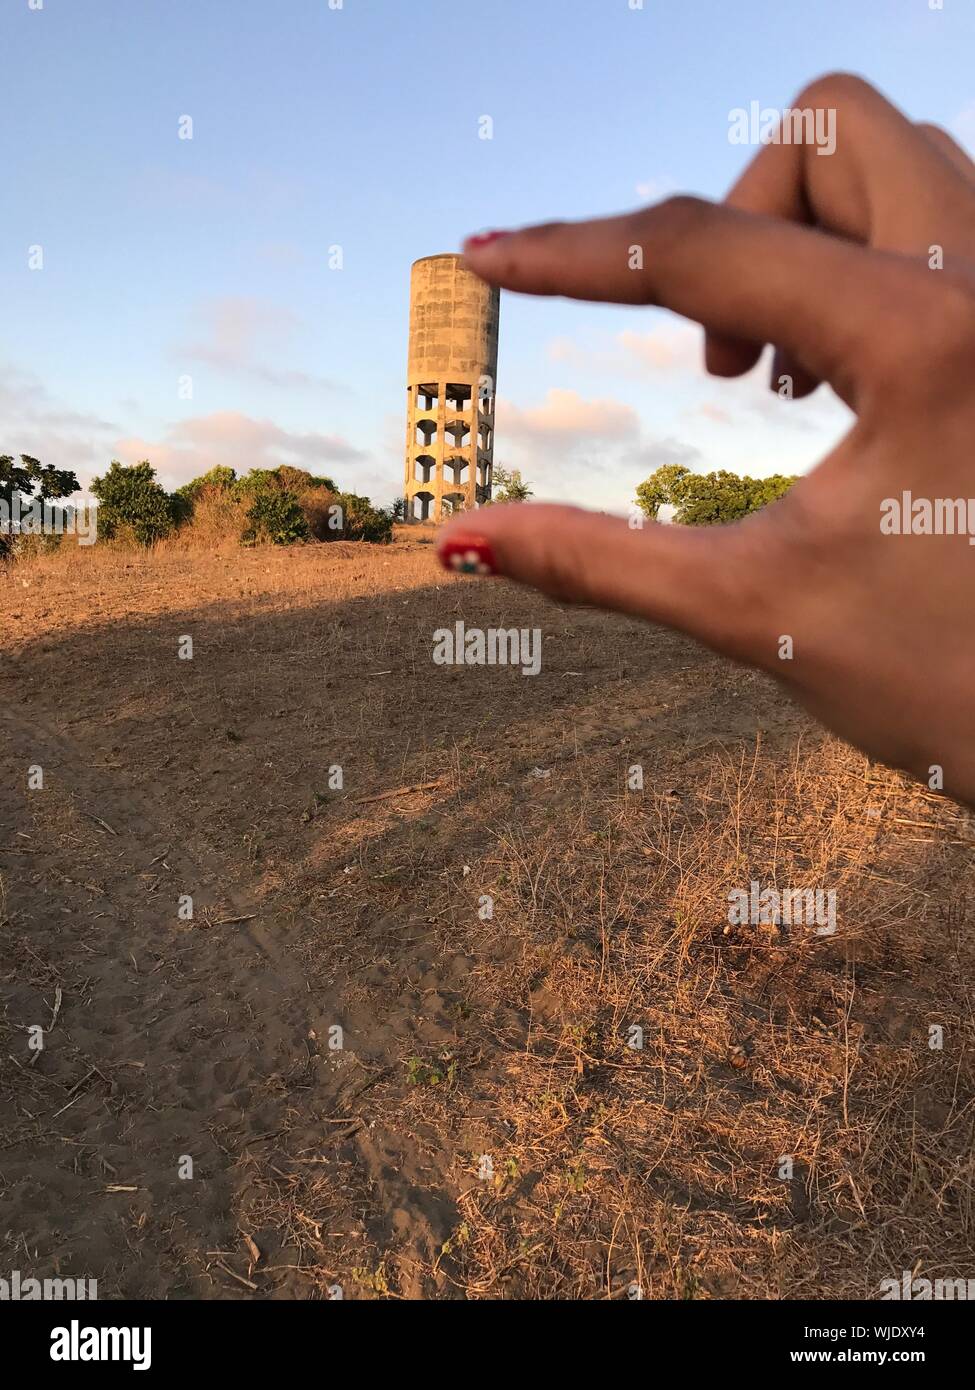 Optical Illusion Of Woman Holding Water Tank Against Sky Stock Photo